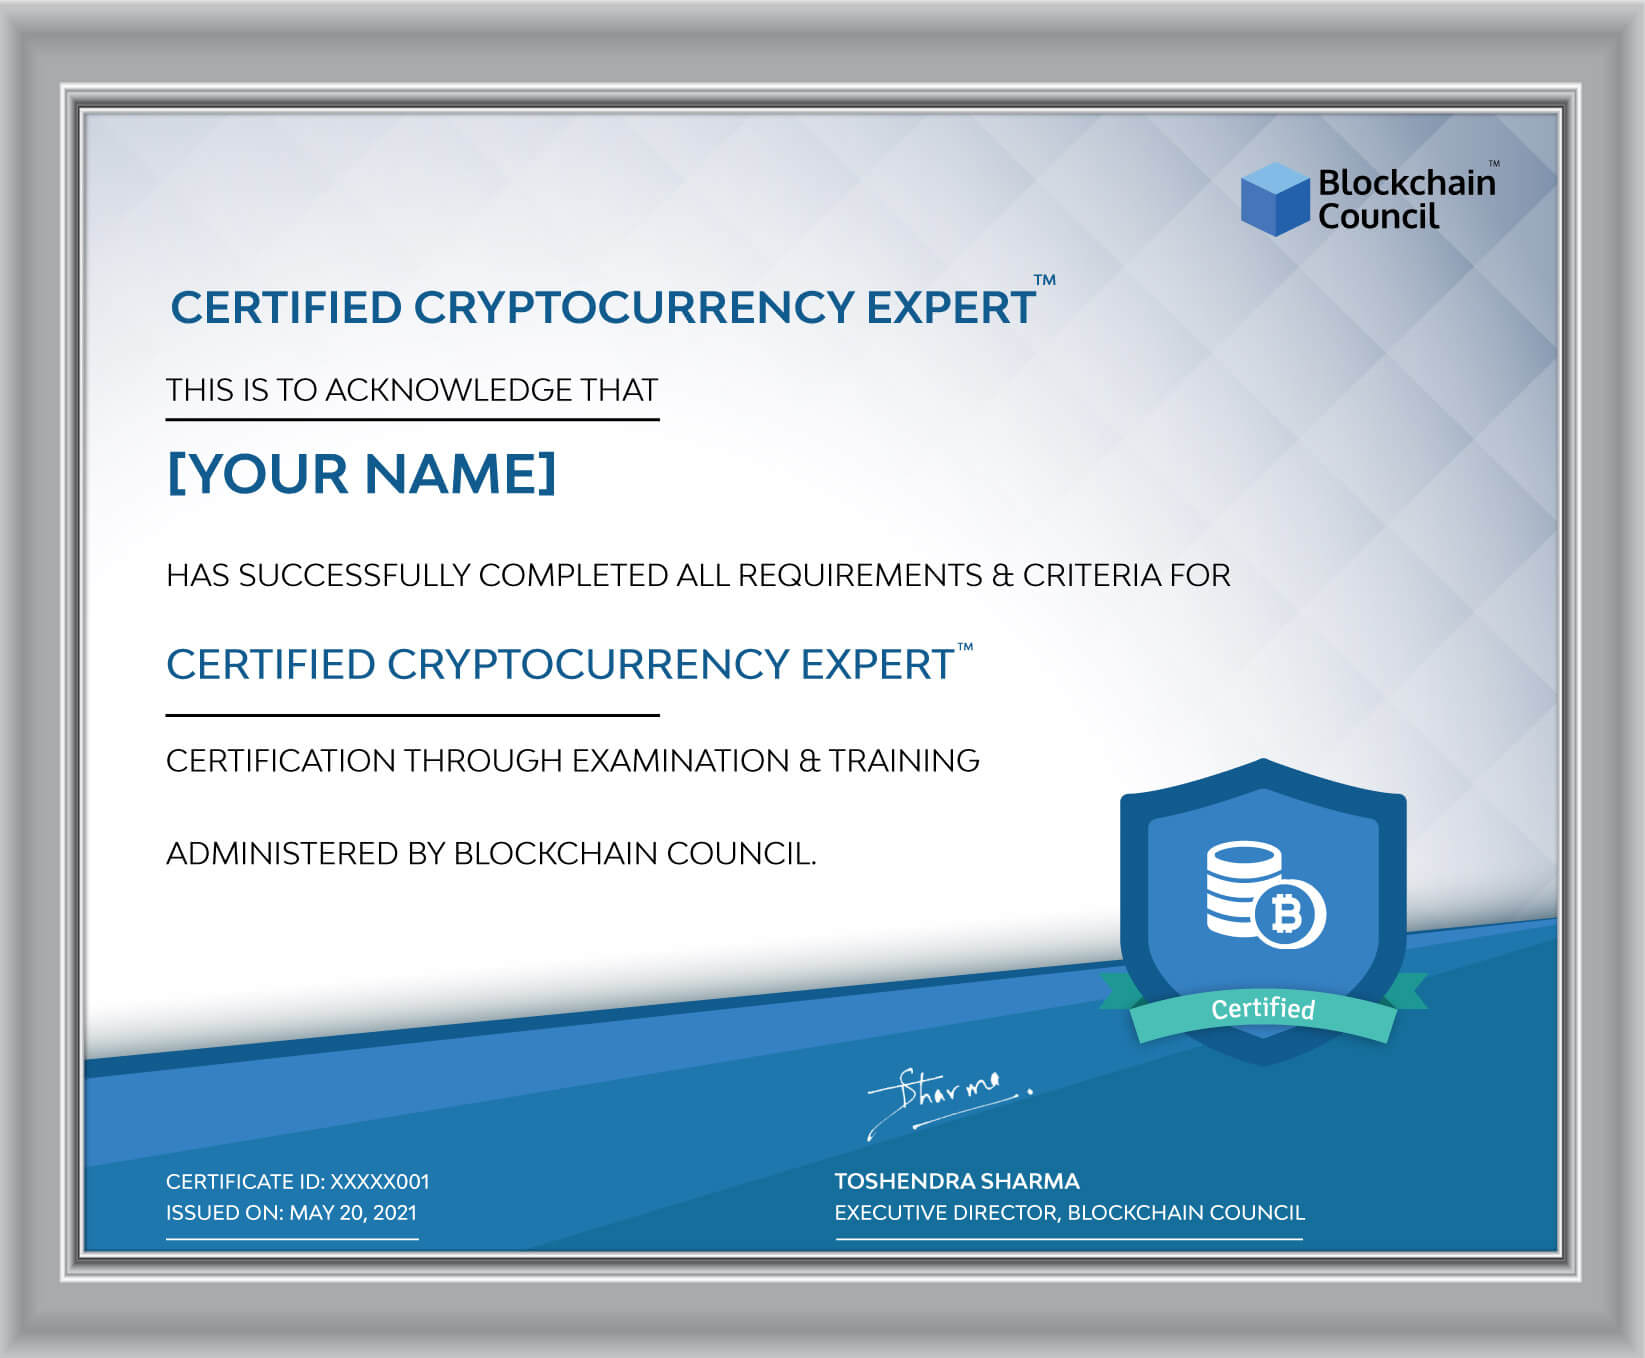 Certified-Cryptocurrency-Expert-certificate-Frame.jpg